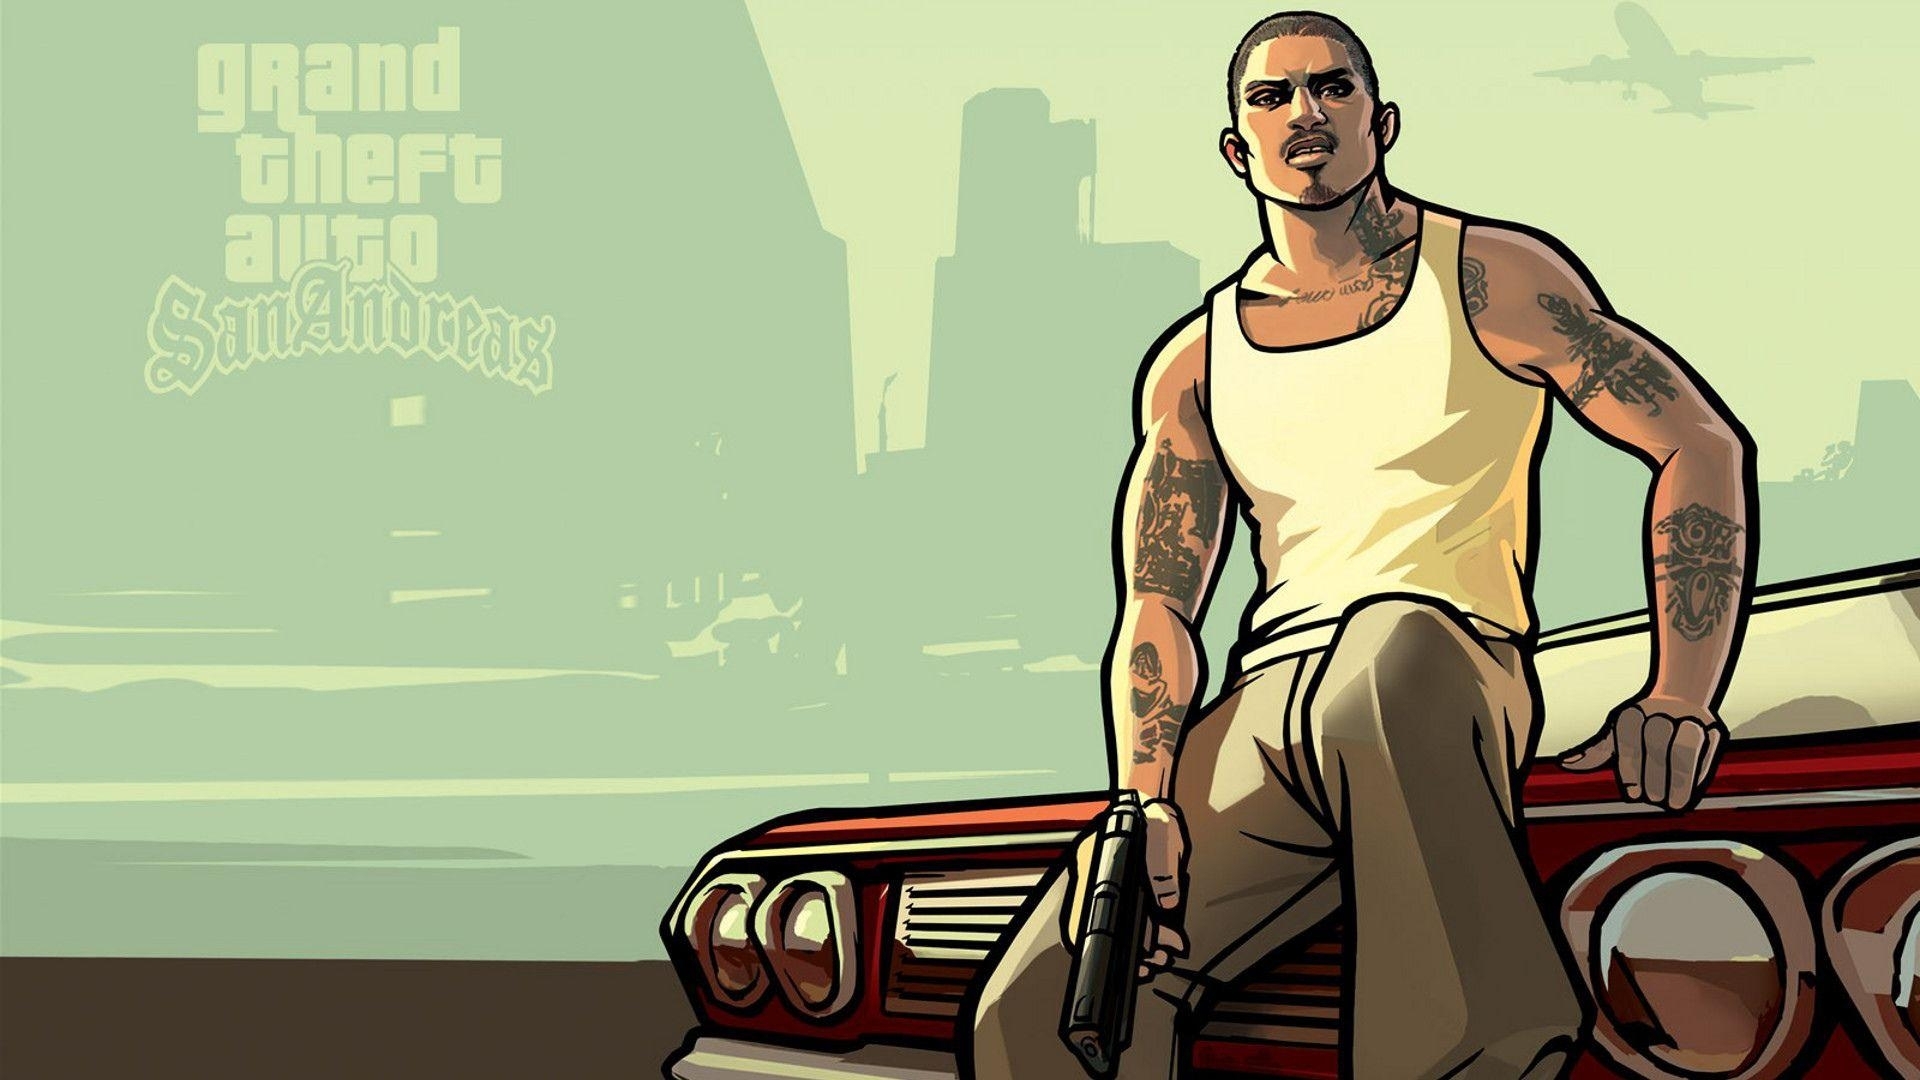 grand theft auto: san andreas wallpapers - wallpaper cave